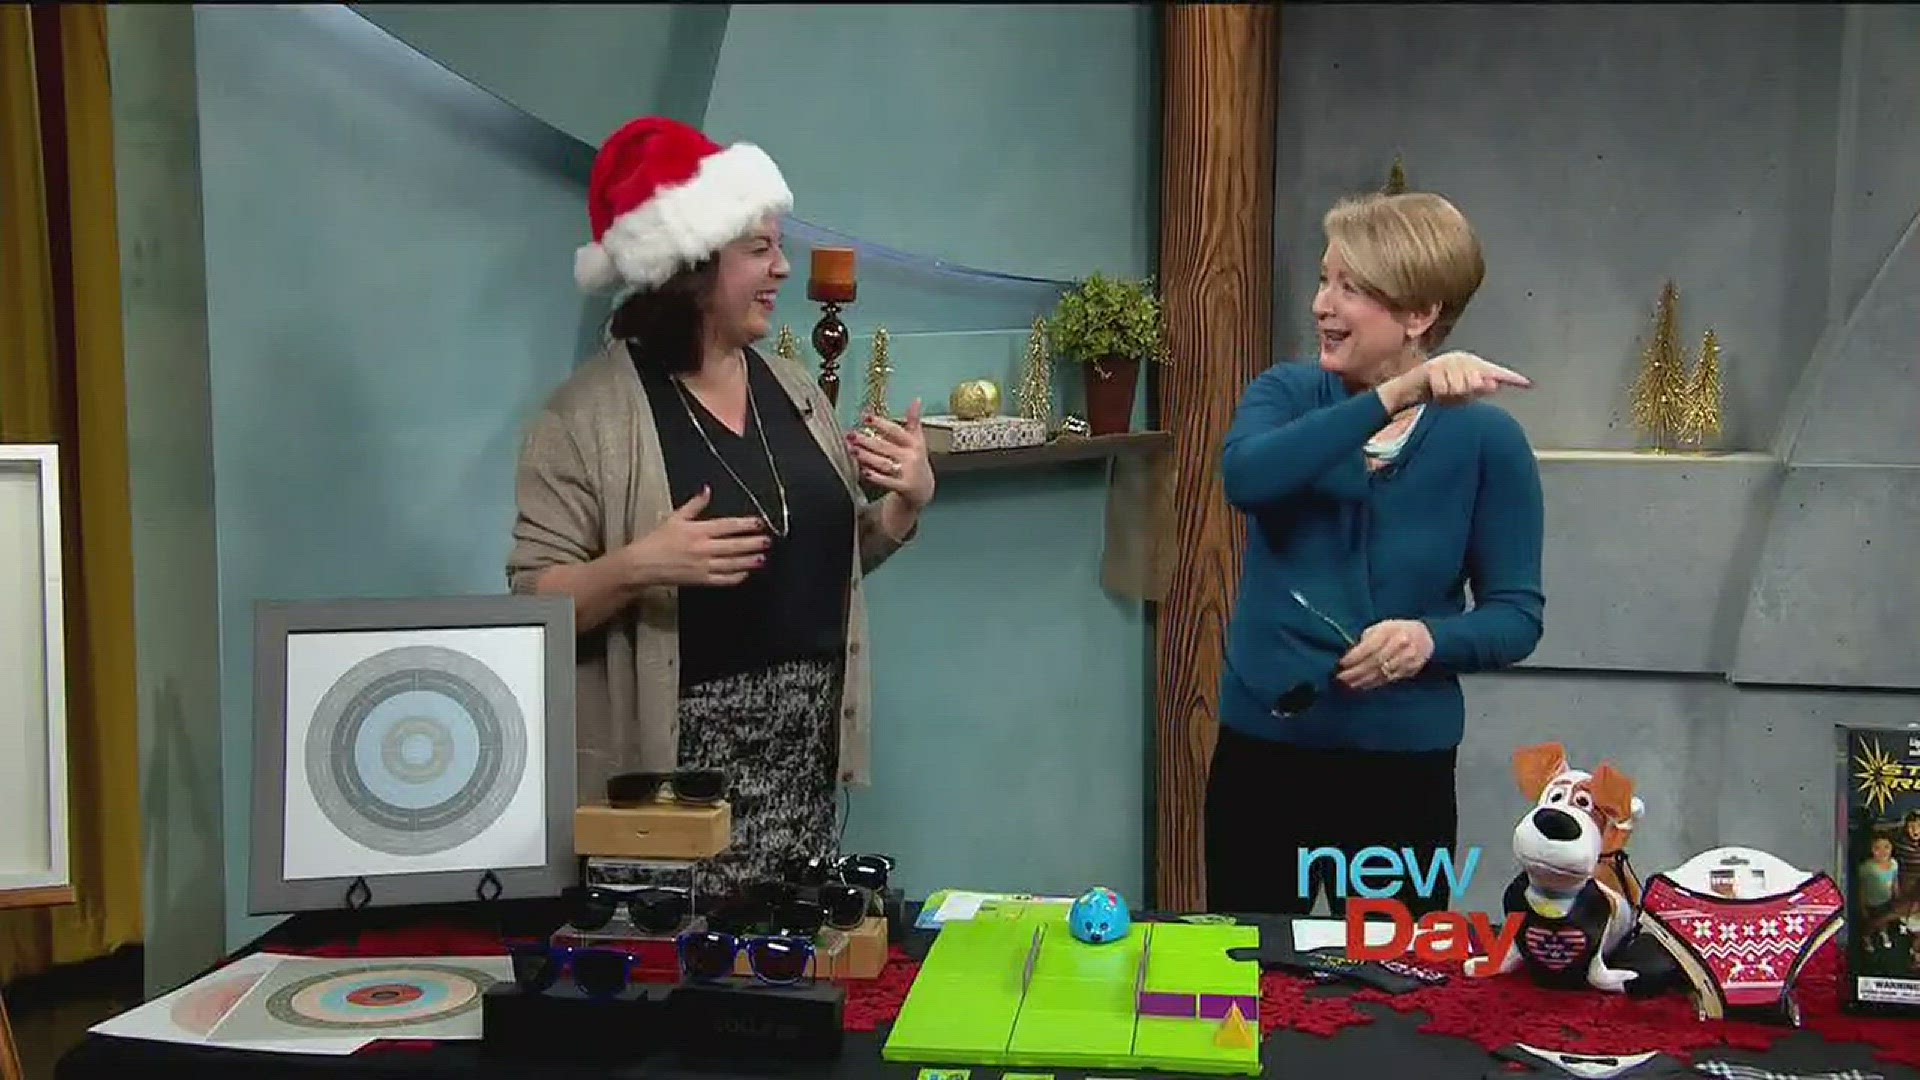 Suzie Claus is back showing and sharing the seasons trendiest gifts for all!